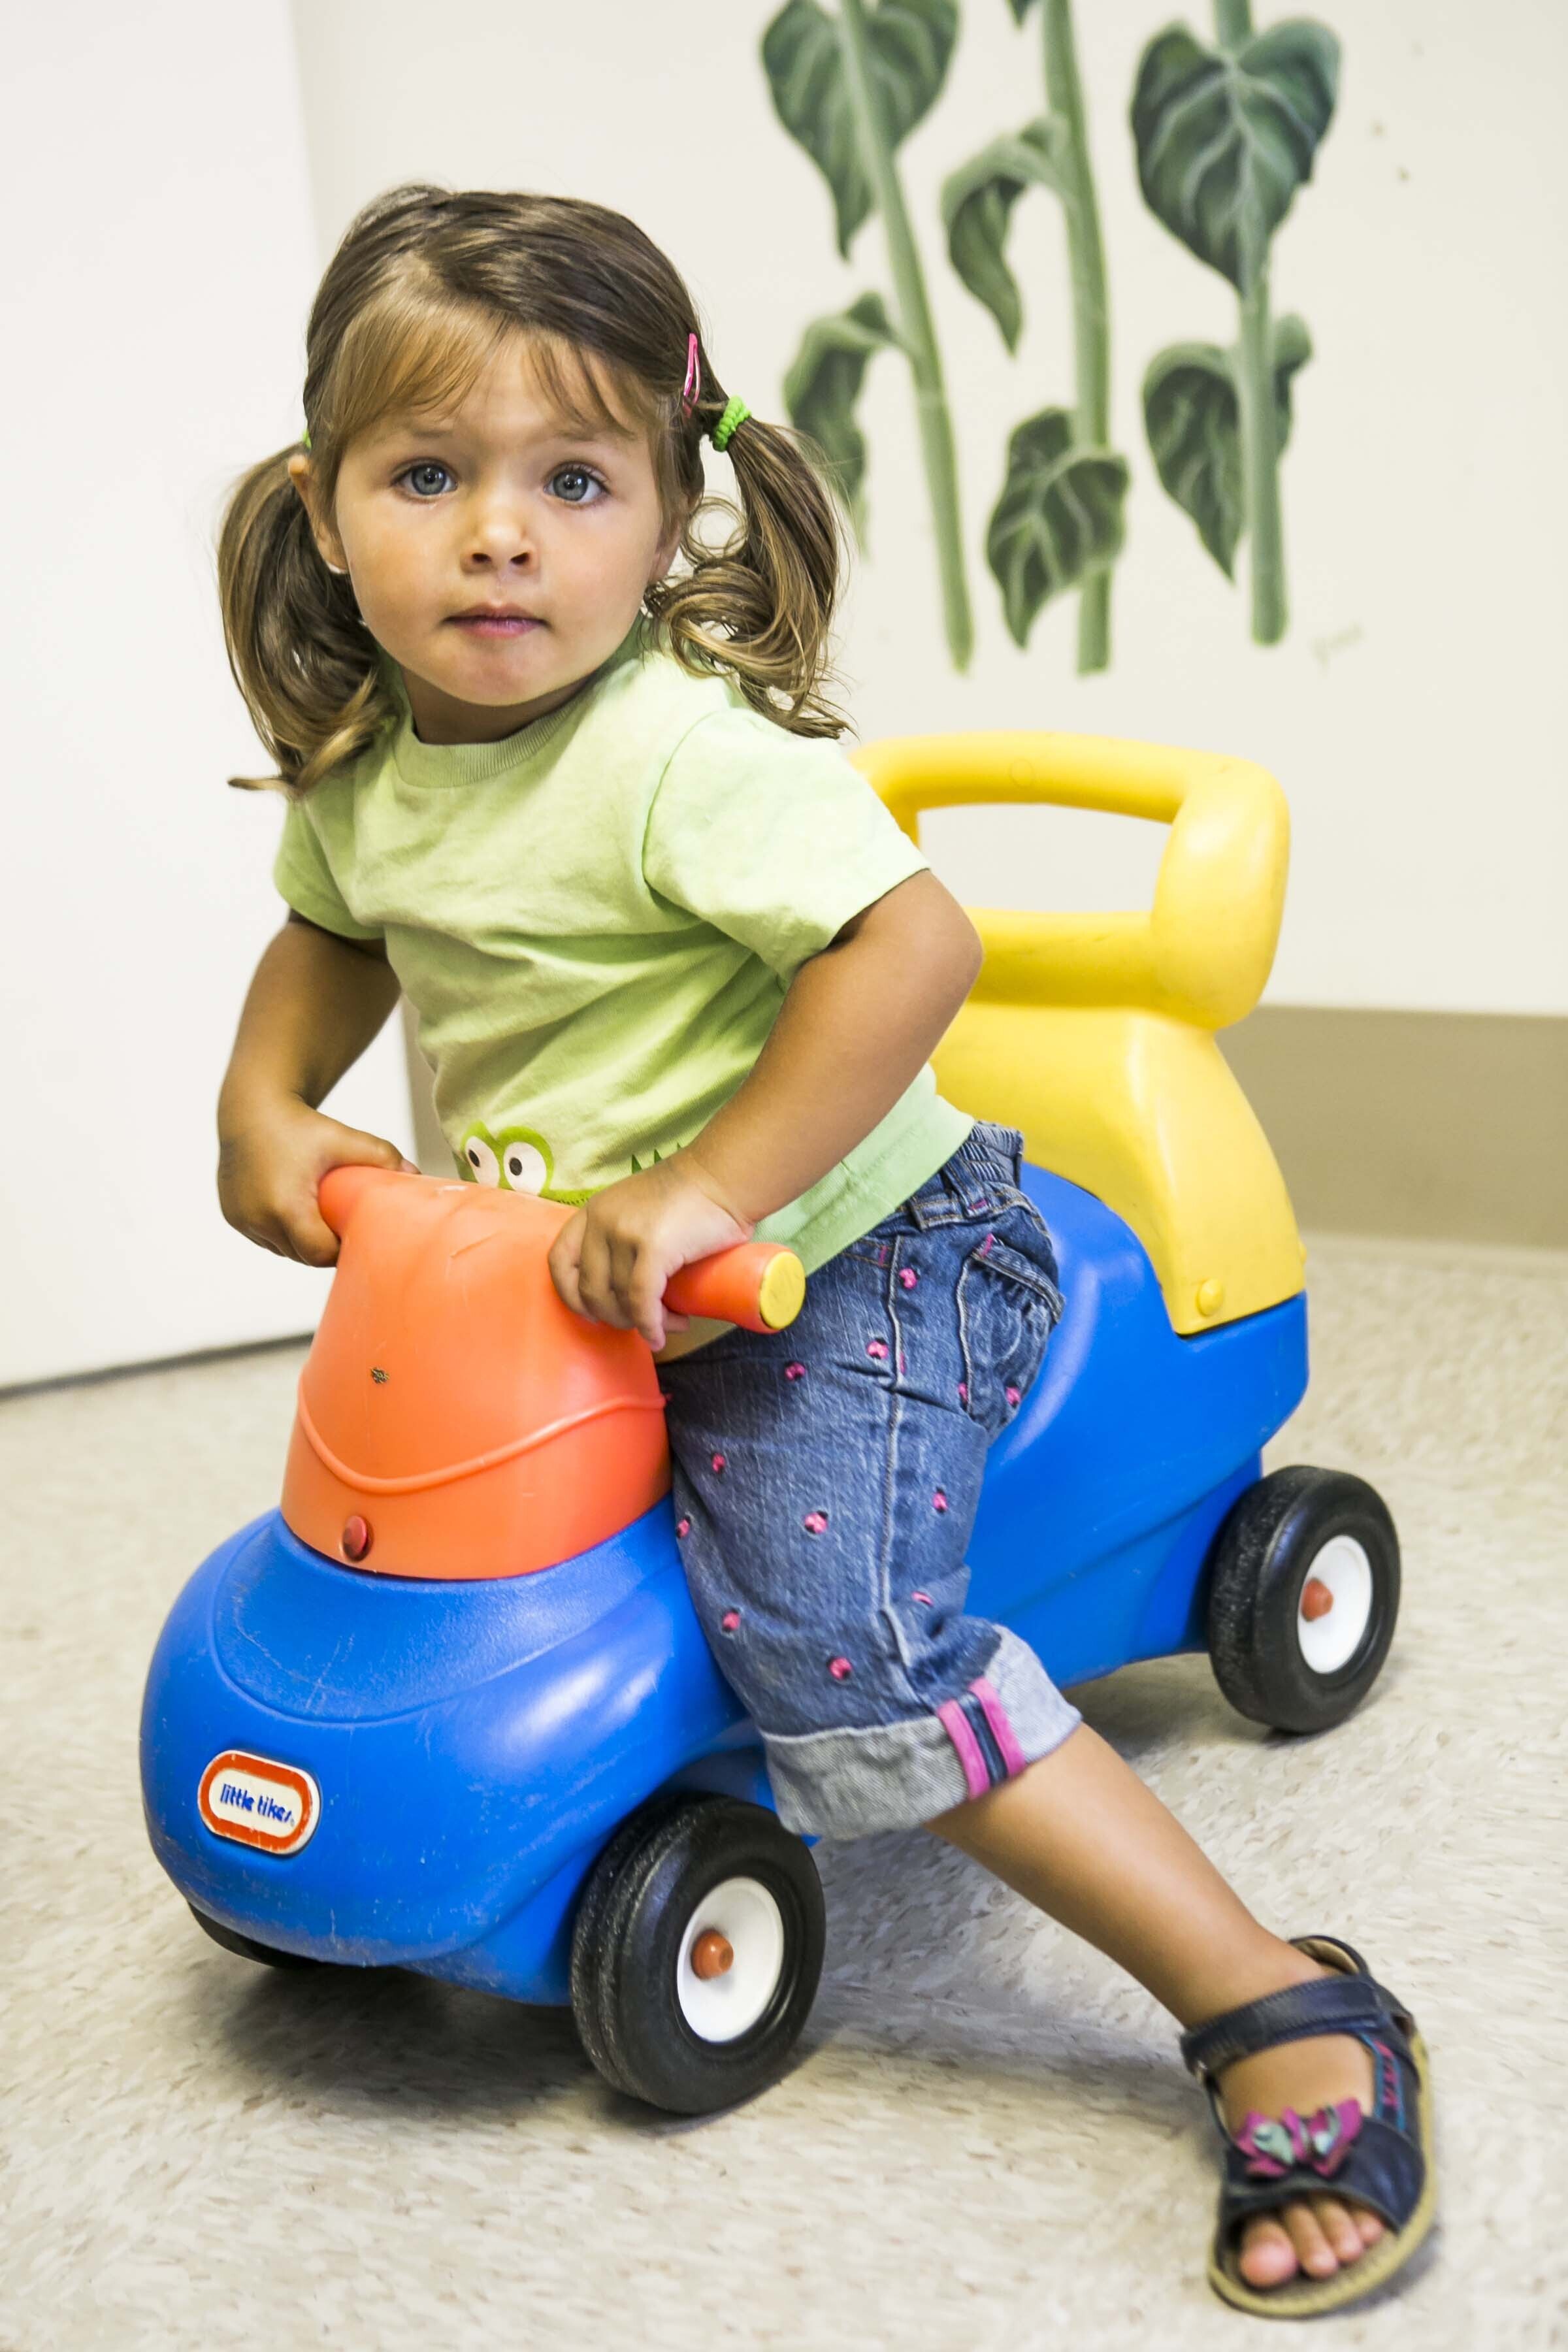 Child playing with toy vehicle